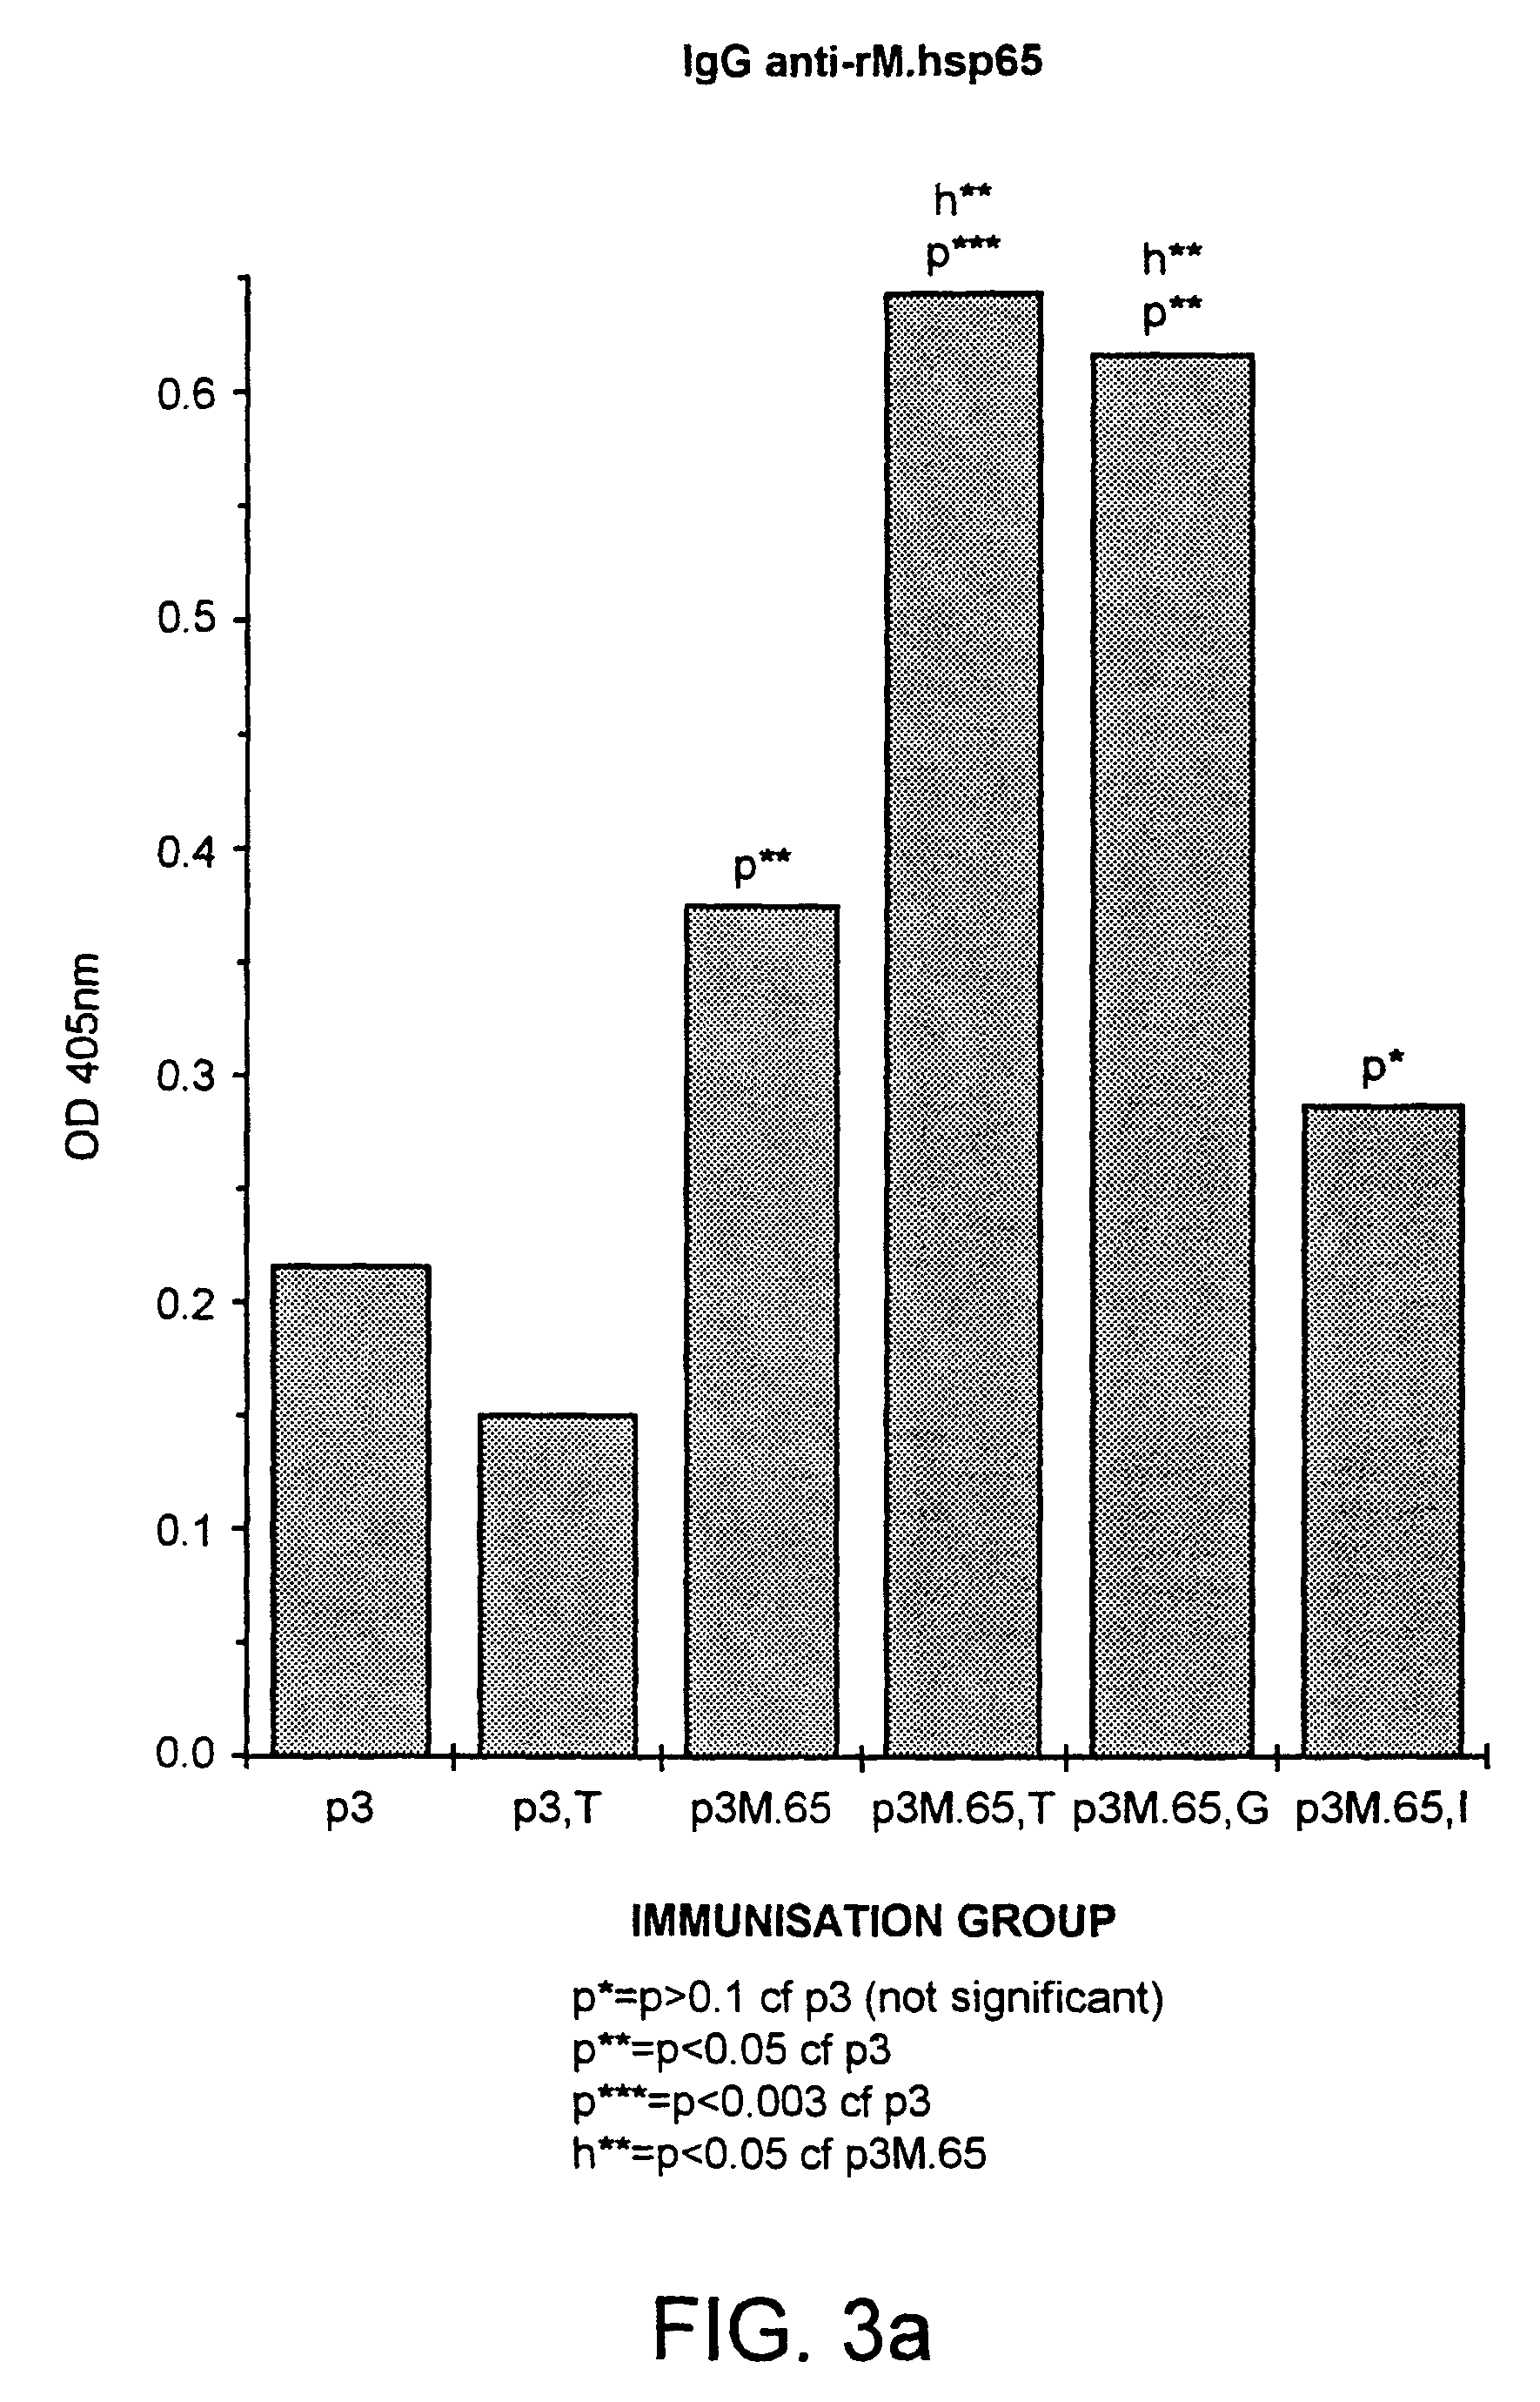 Method of DNA vaccination